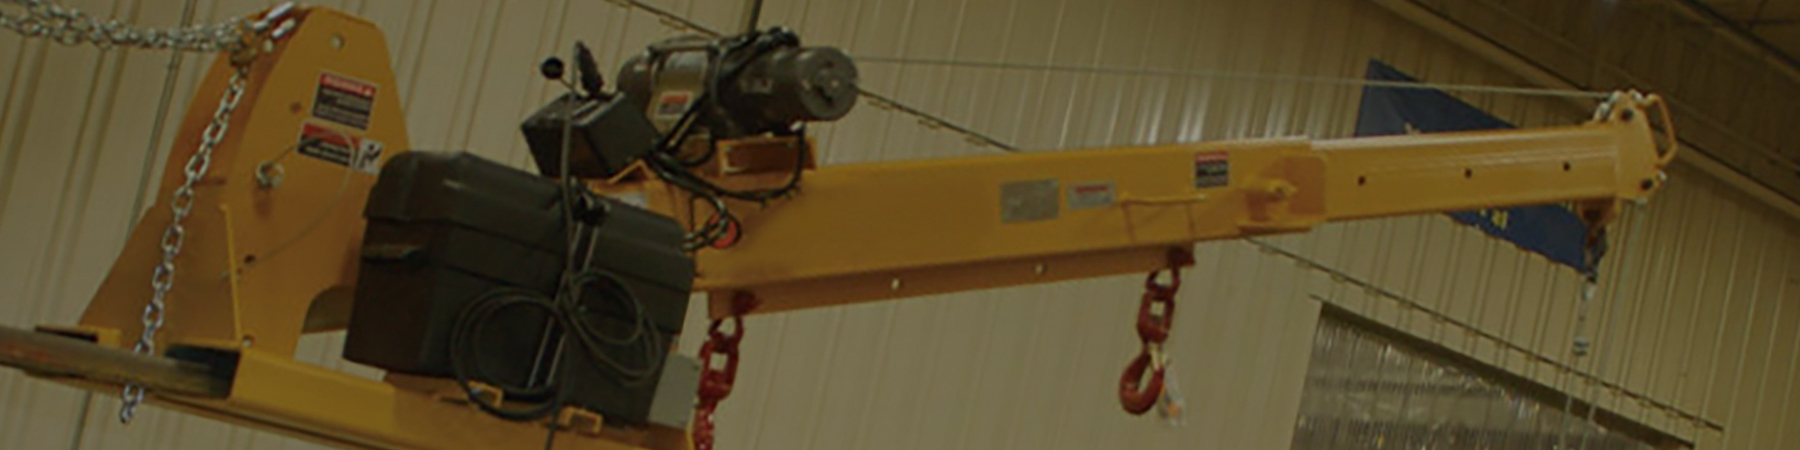 Forklift Boom, Jib, and Hook Attachments